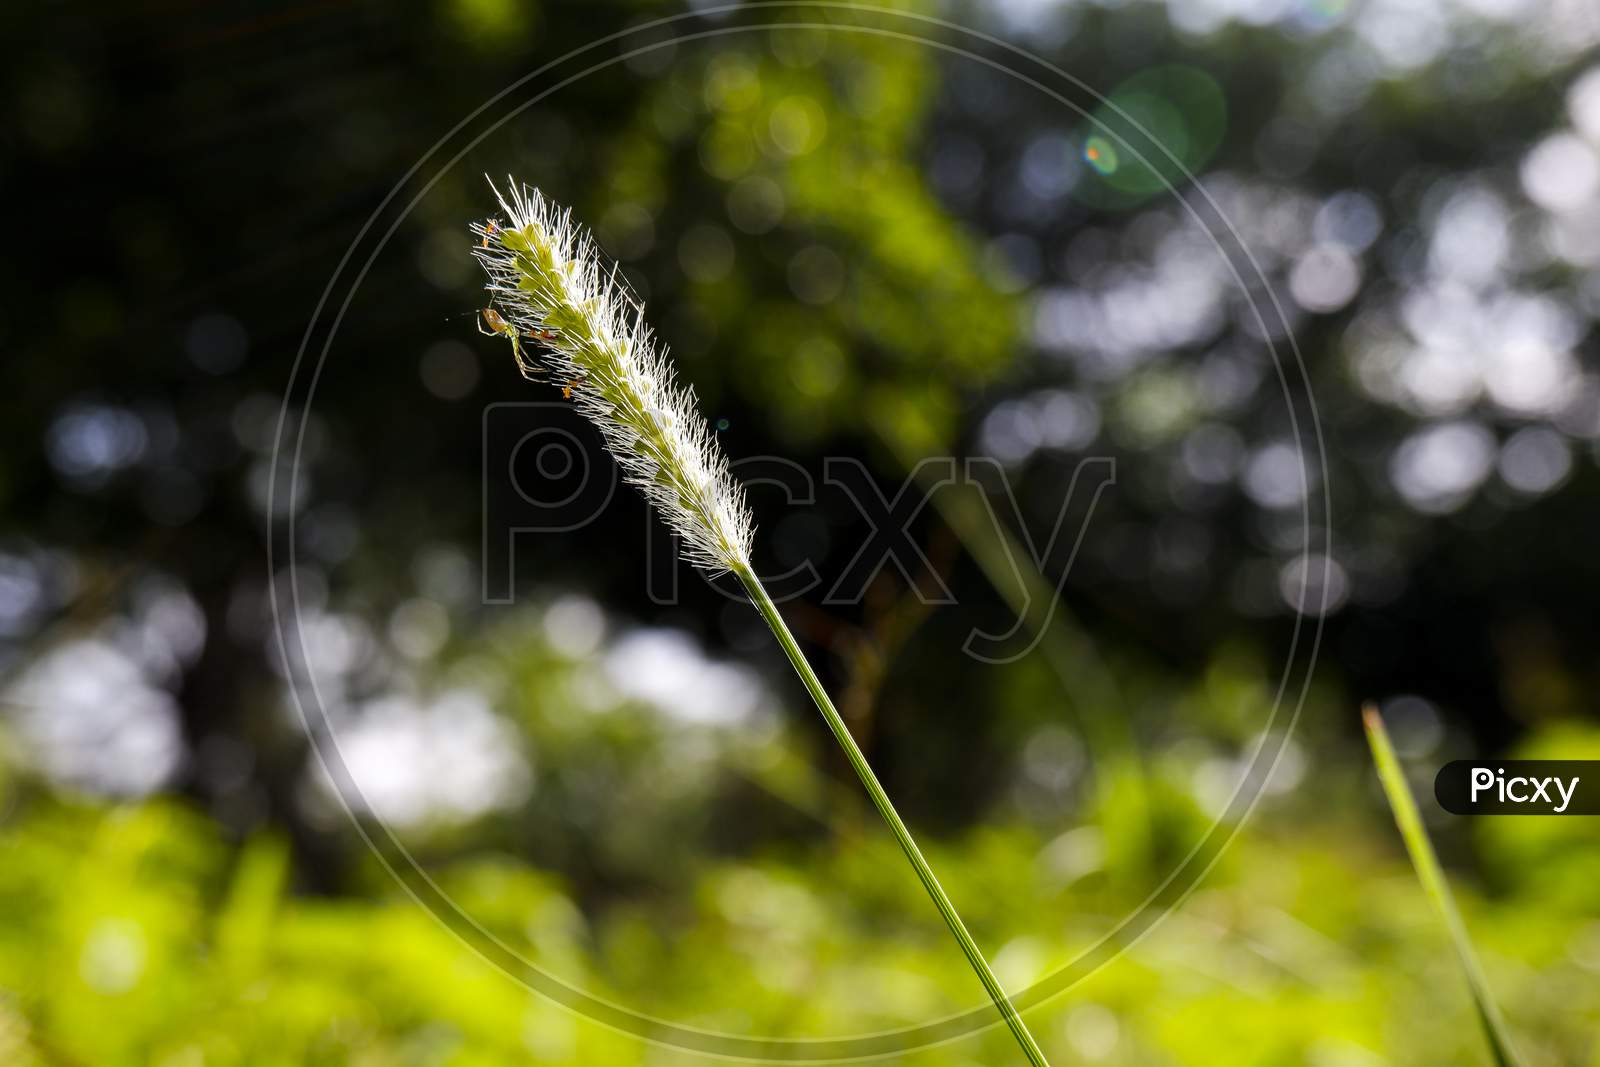 Close Shot Of Foxtail Wild Grass With Spider Isolated In Garden